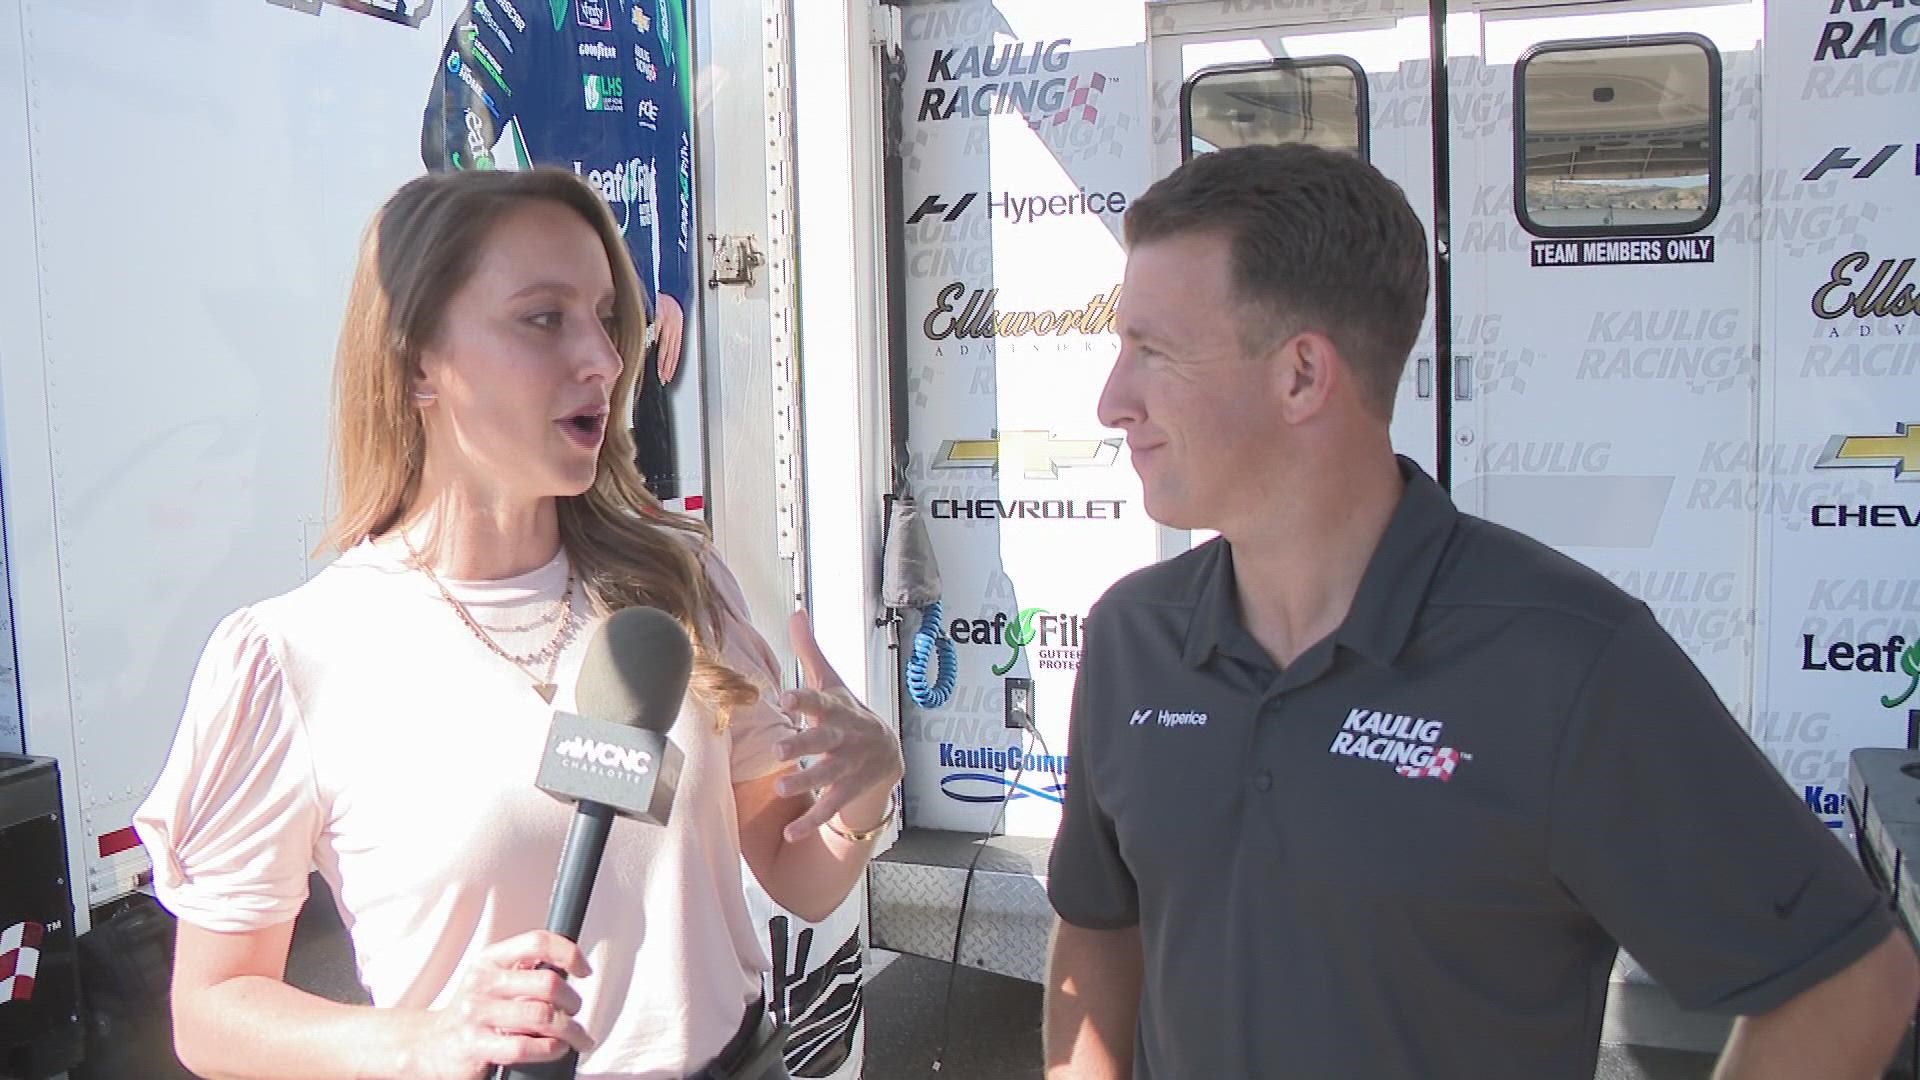 Ashley Stroehlein has more from Phoenix ahead for the NASCAR championship race weekend!